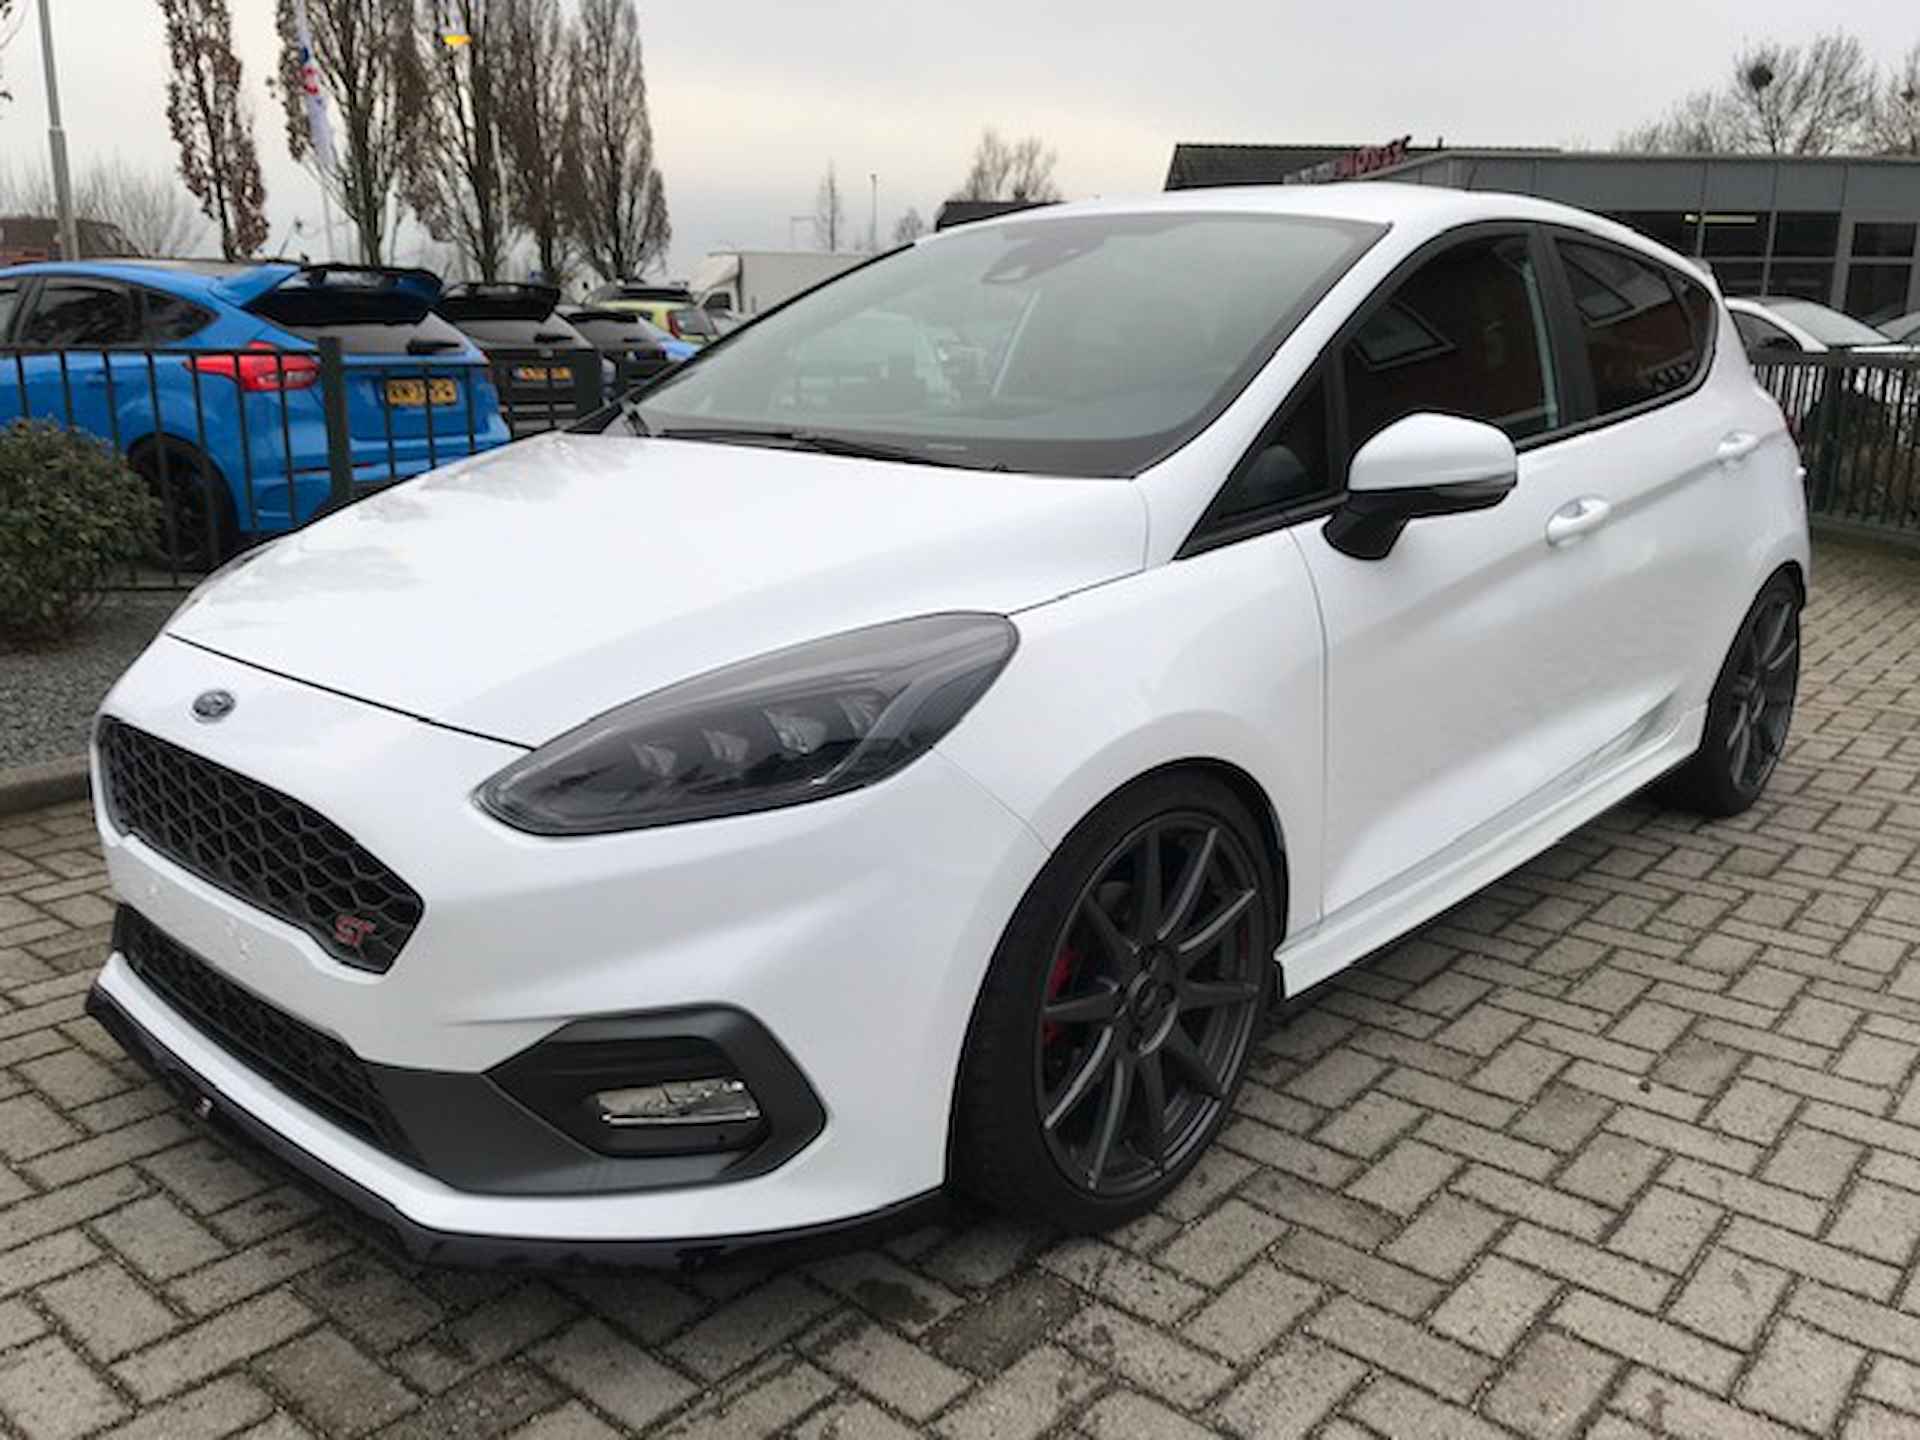 Ford Fiesta 1.5 EcoBoost ST-3 Mountune 235 PK Performance - 11/11